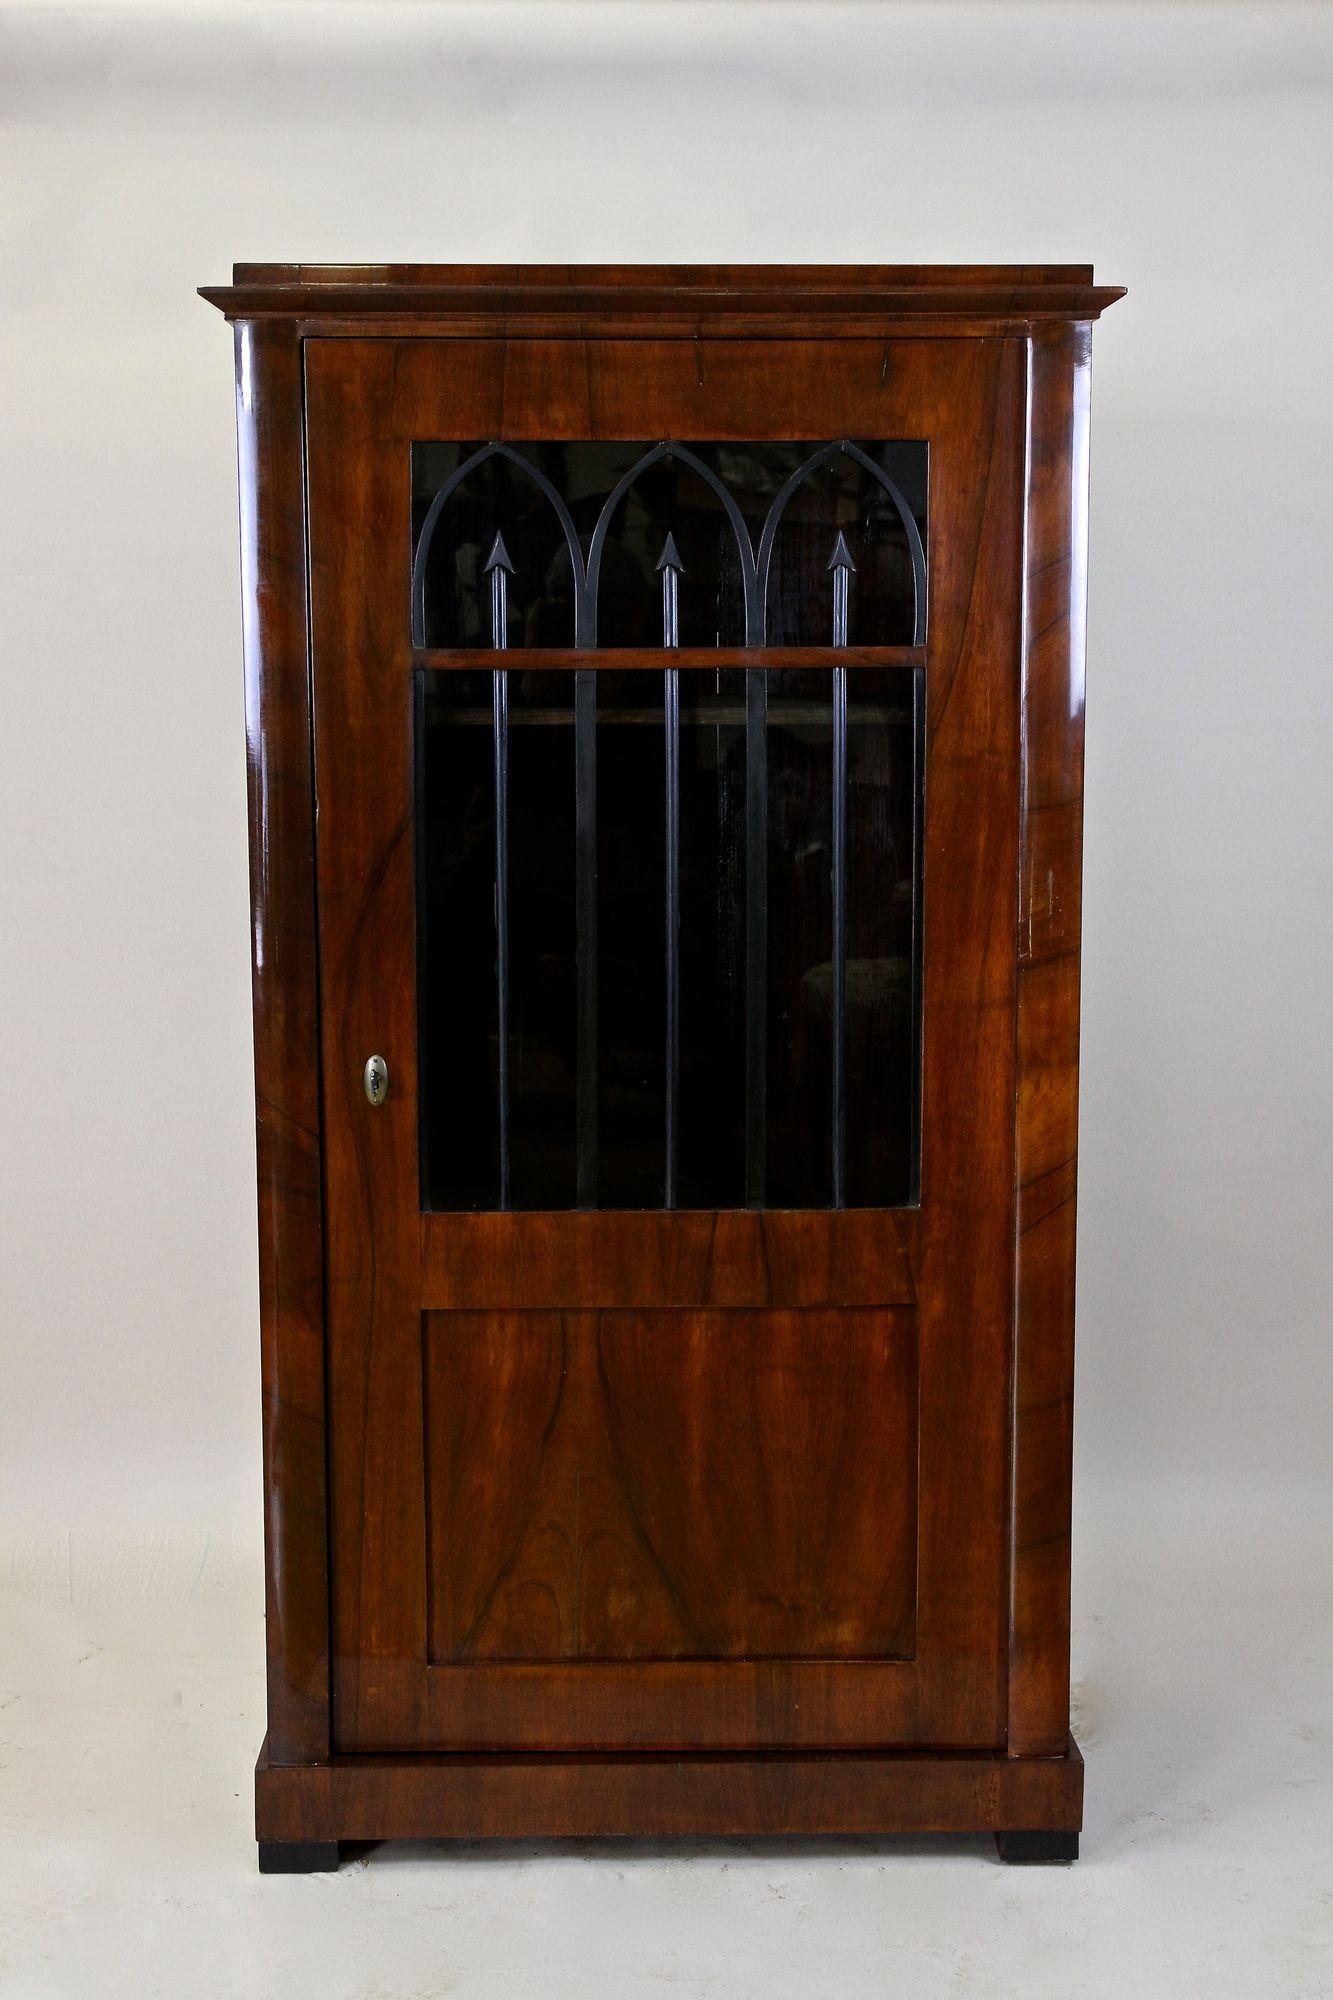 Beautiful Biedermeier bookcase or display cabinet from the famous period in Vienna around 1840. This fantastic looking 19th Century Austrian vitrine cabinet has been veneered in a very dark nutwood. A perfect sized antique bookcase/ vitrine cabinet